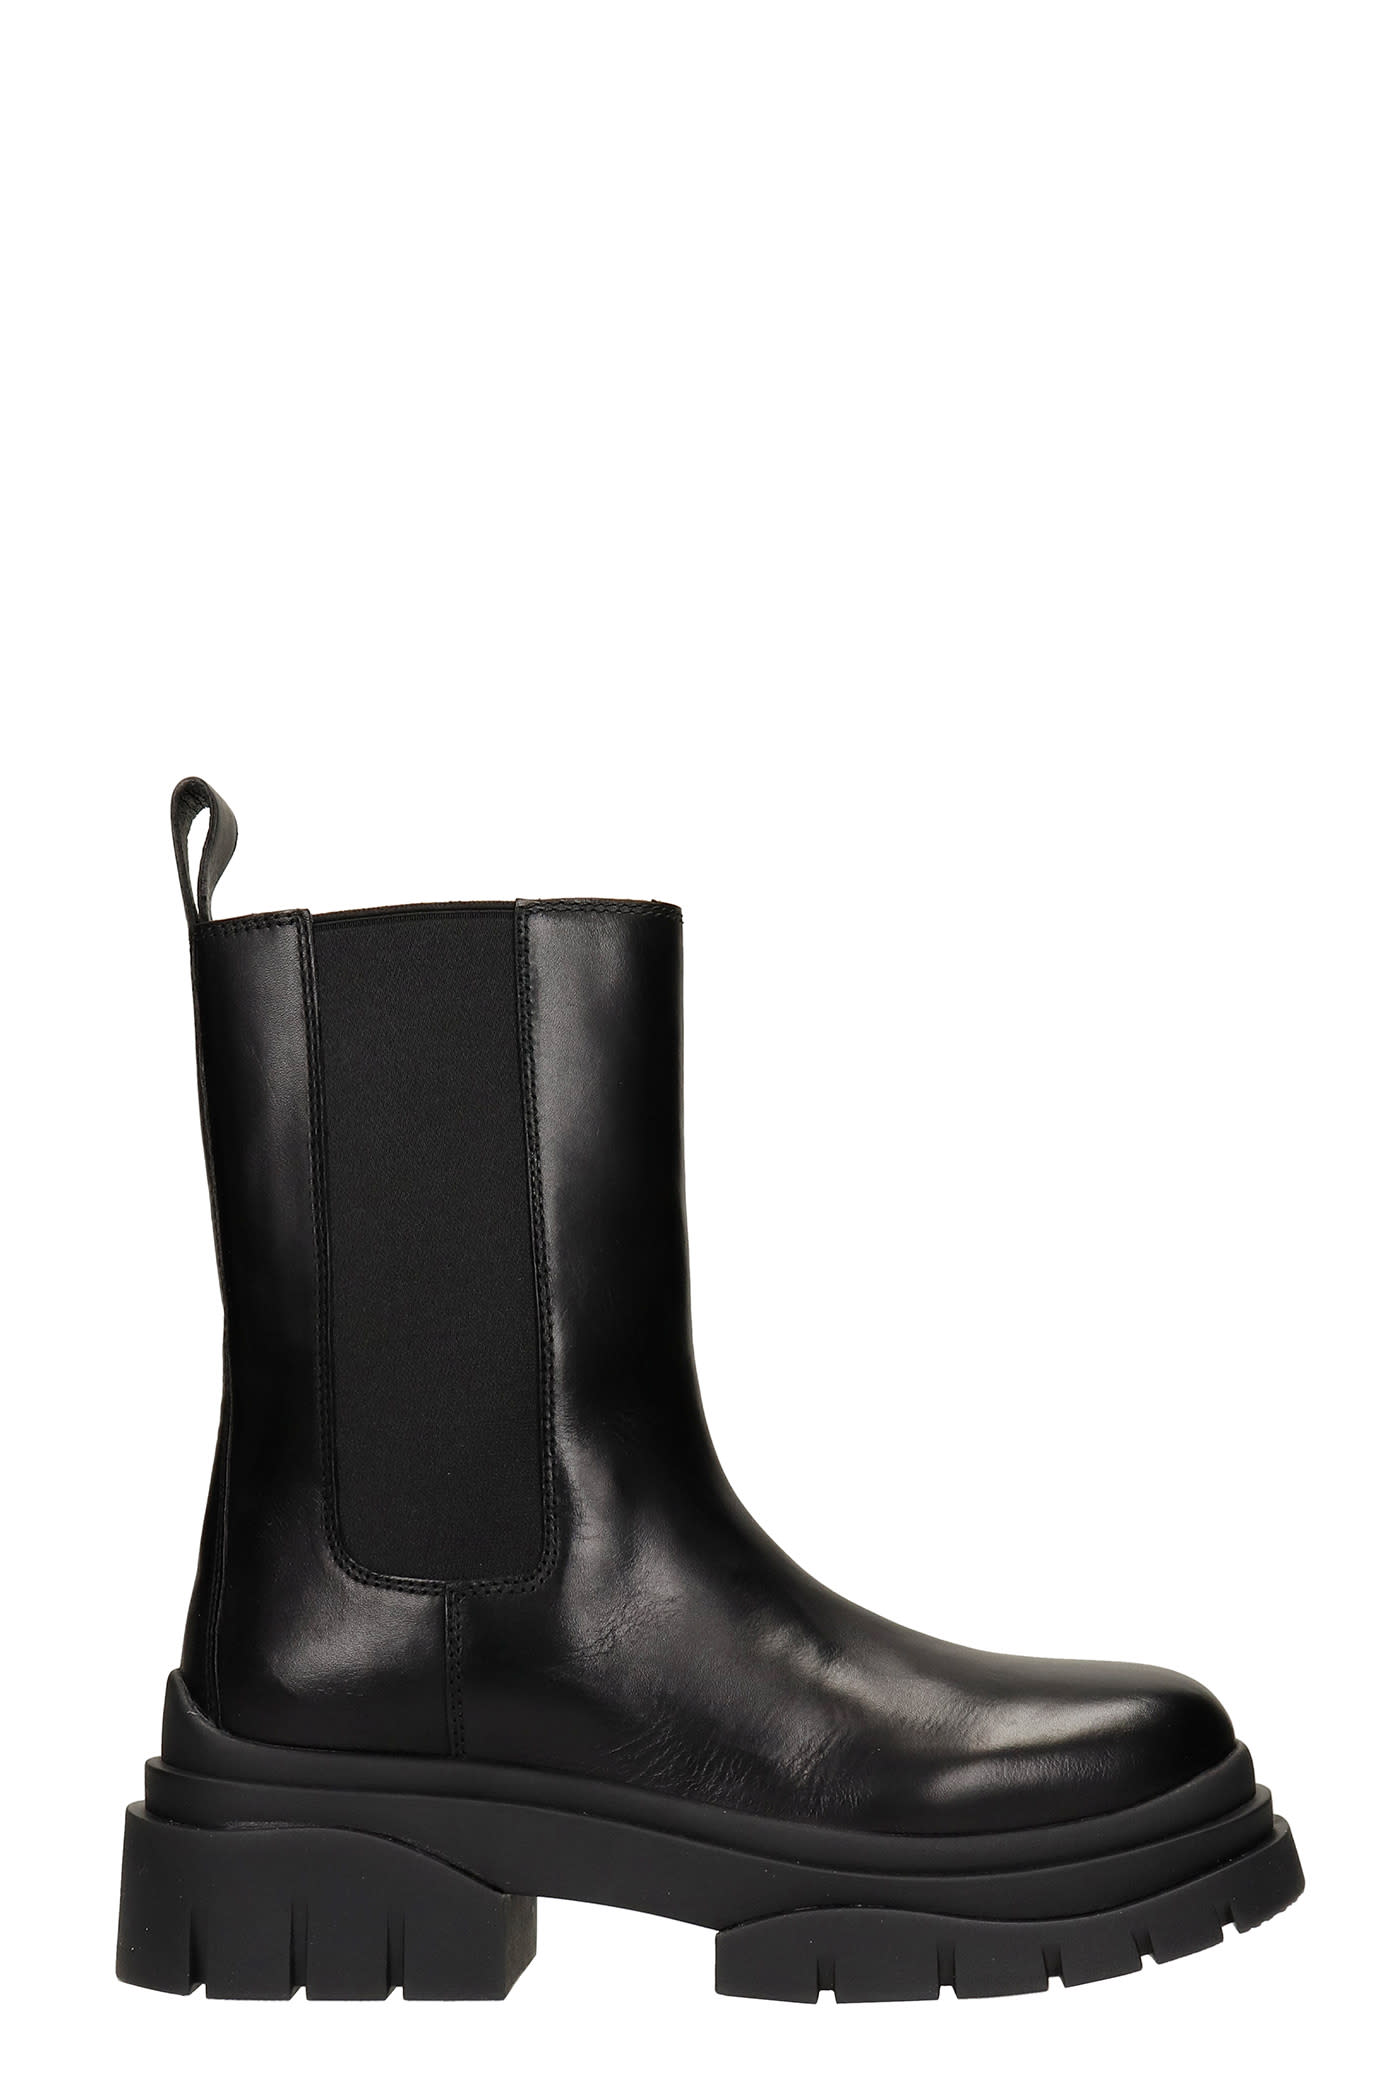 Ash Storm Combat Boots In Black Leather